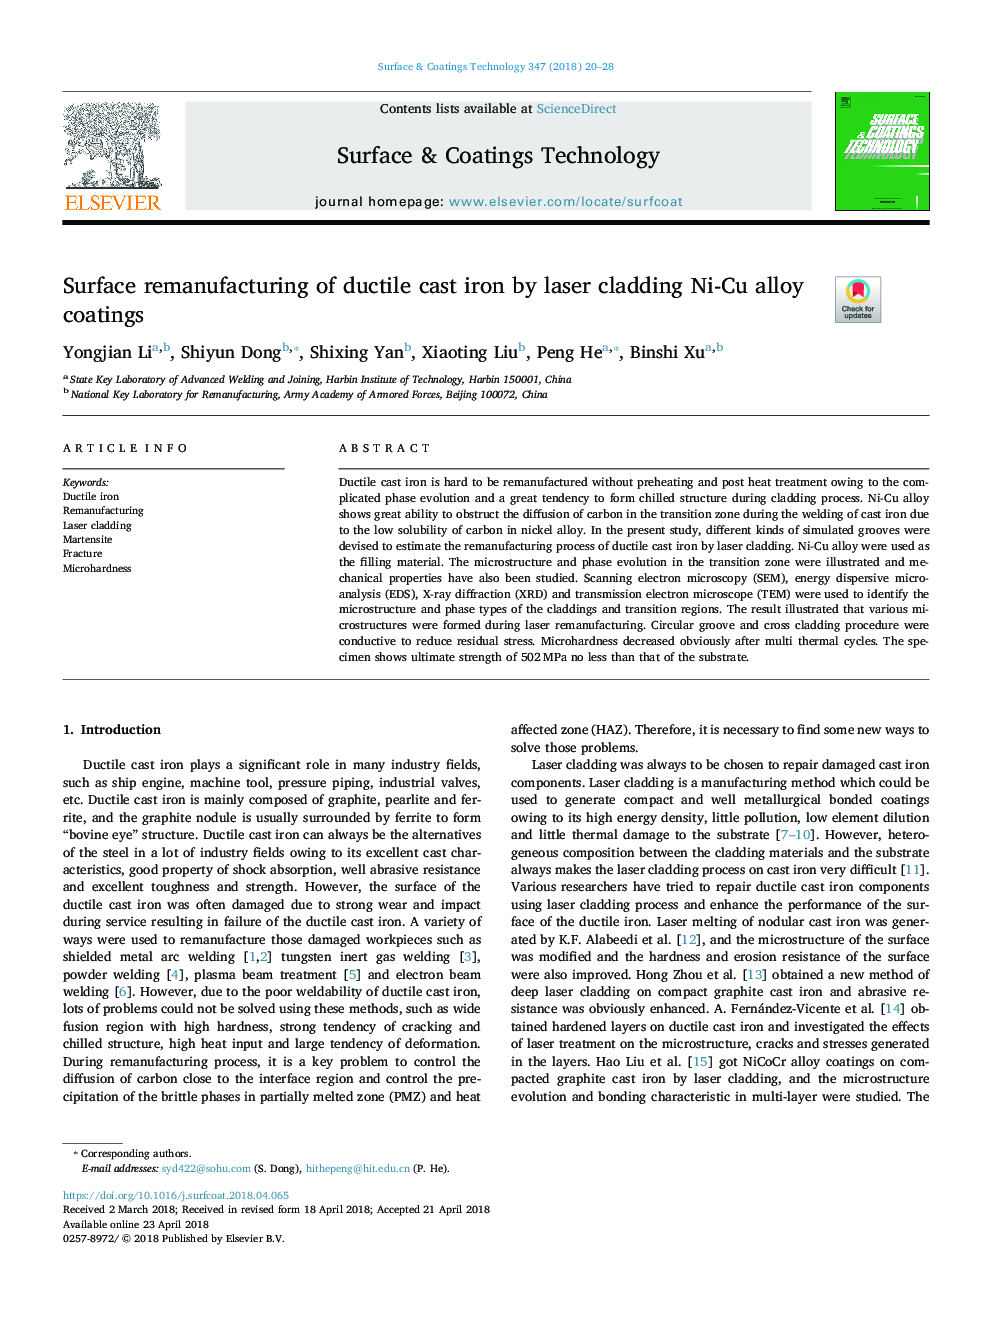 Surface remanufacturing of ductile cast iron by laser cladding Ni-Cu alloy coatings